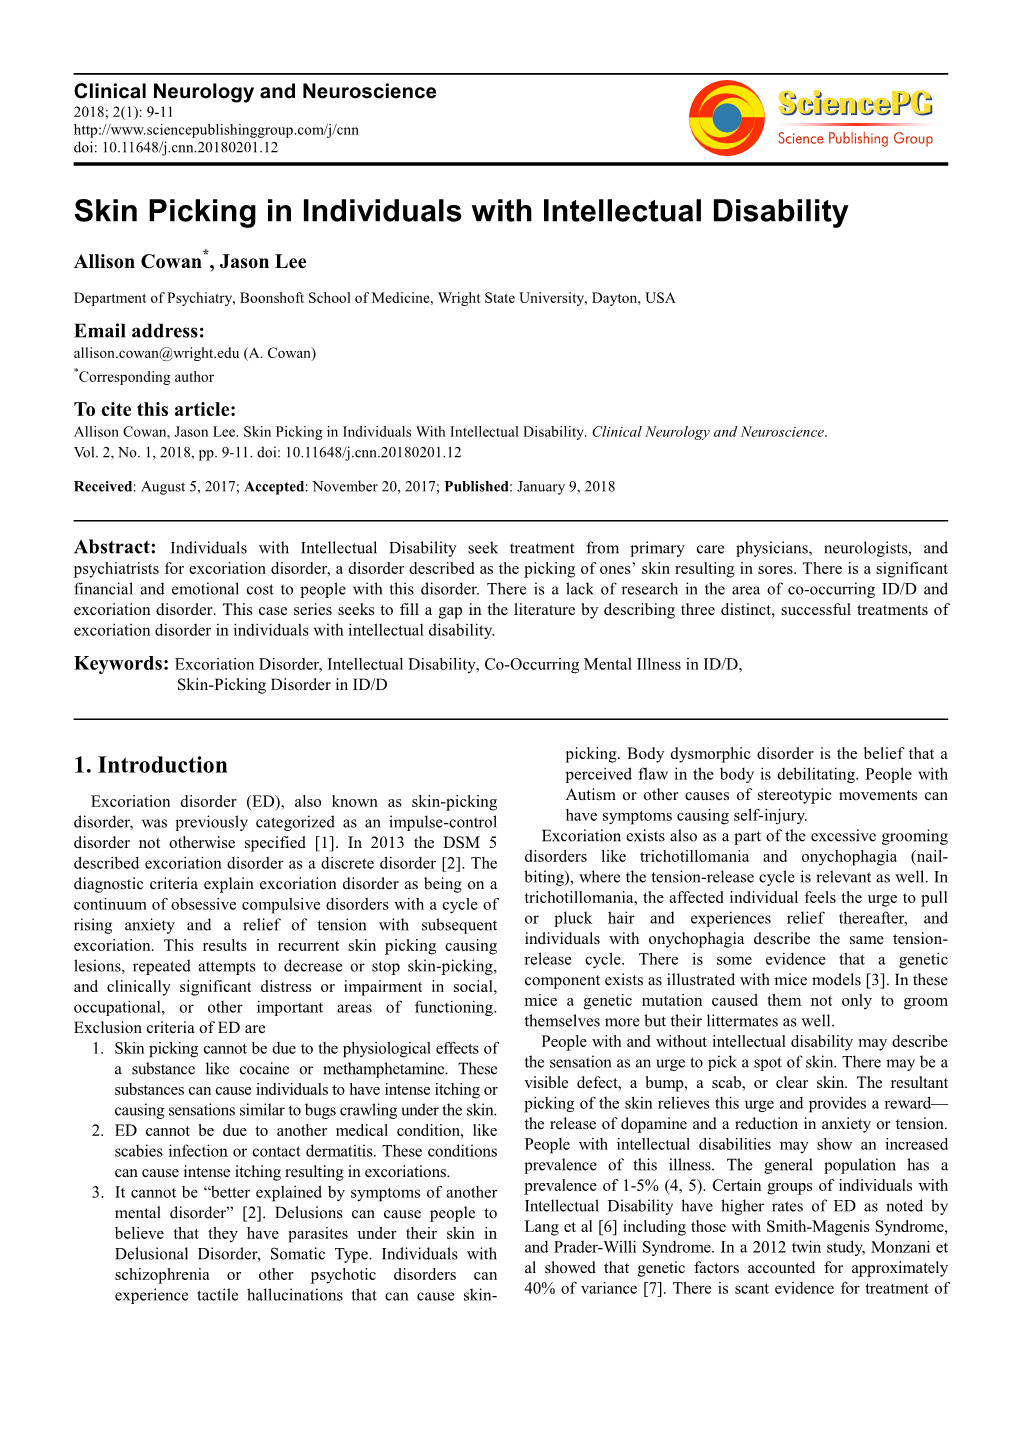 Skin Picking in Individuals with Intellectual Disability